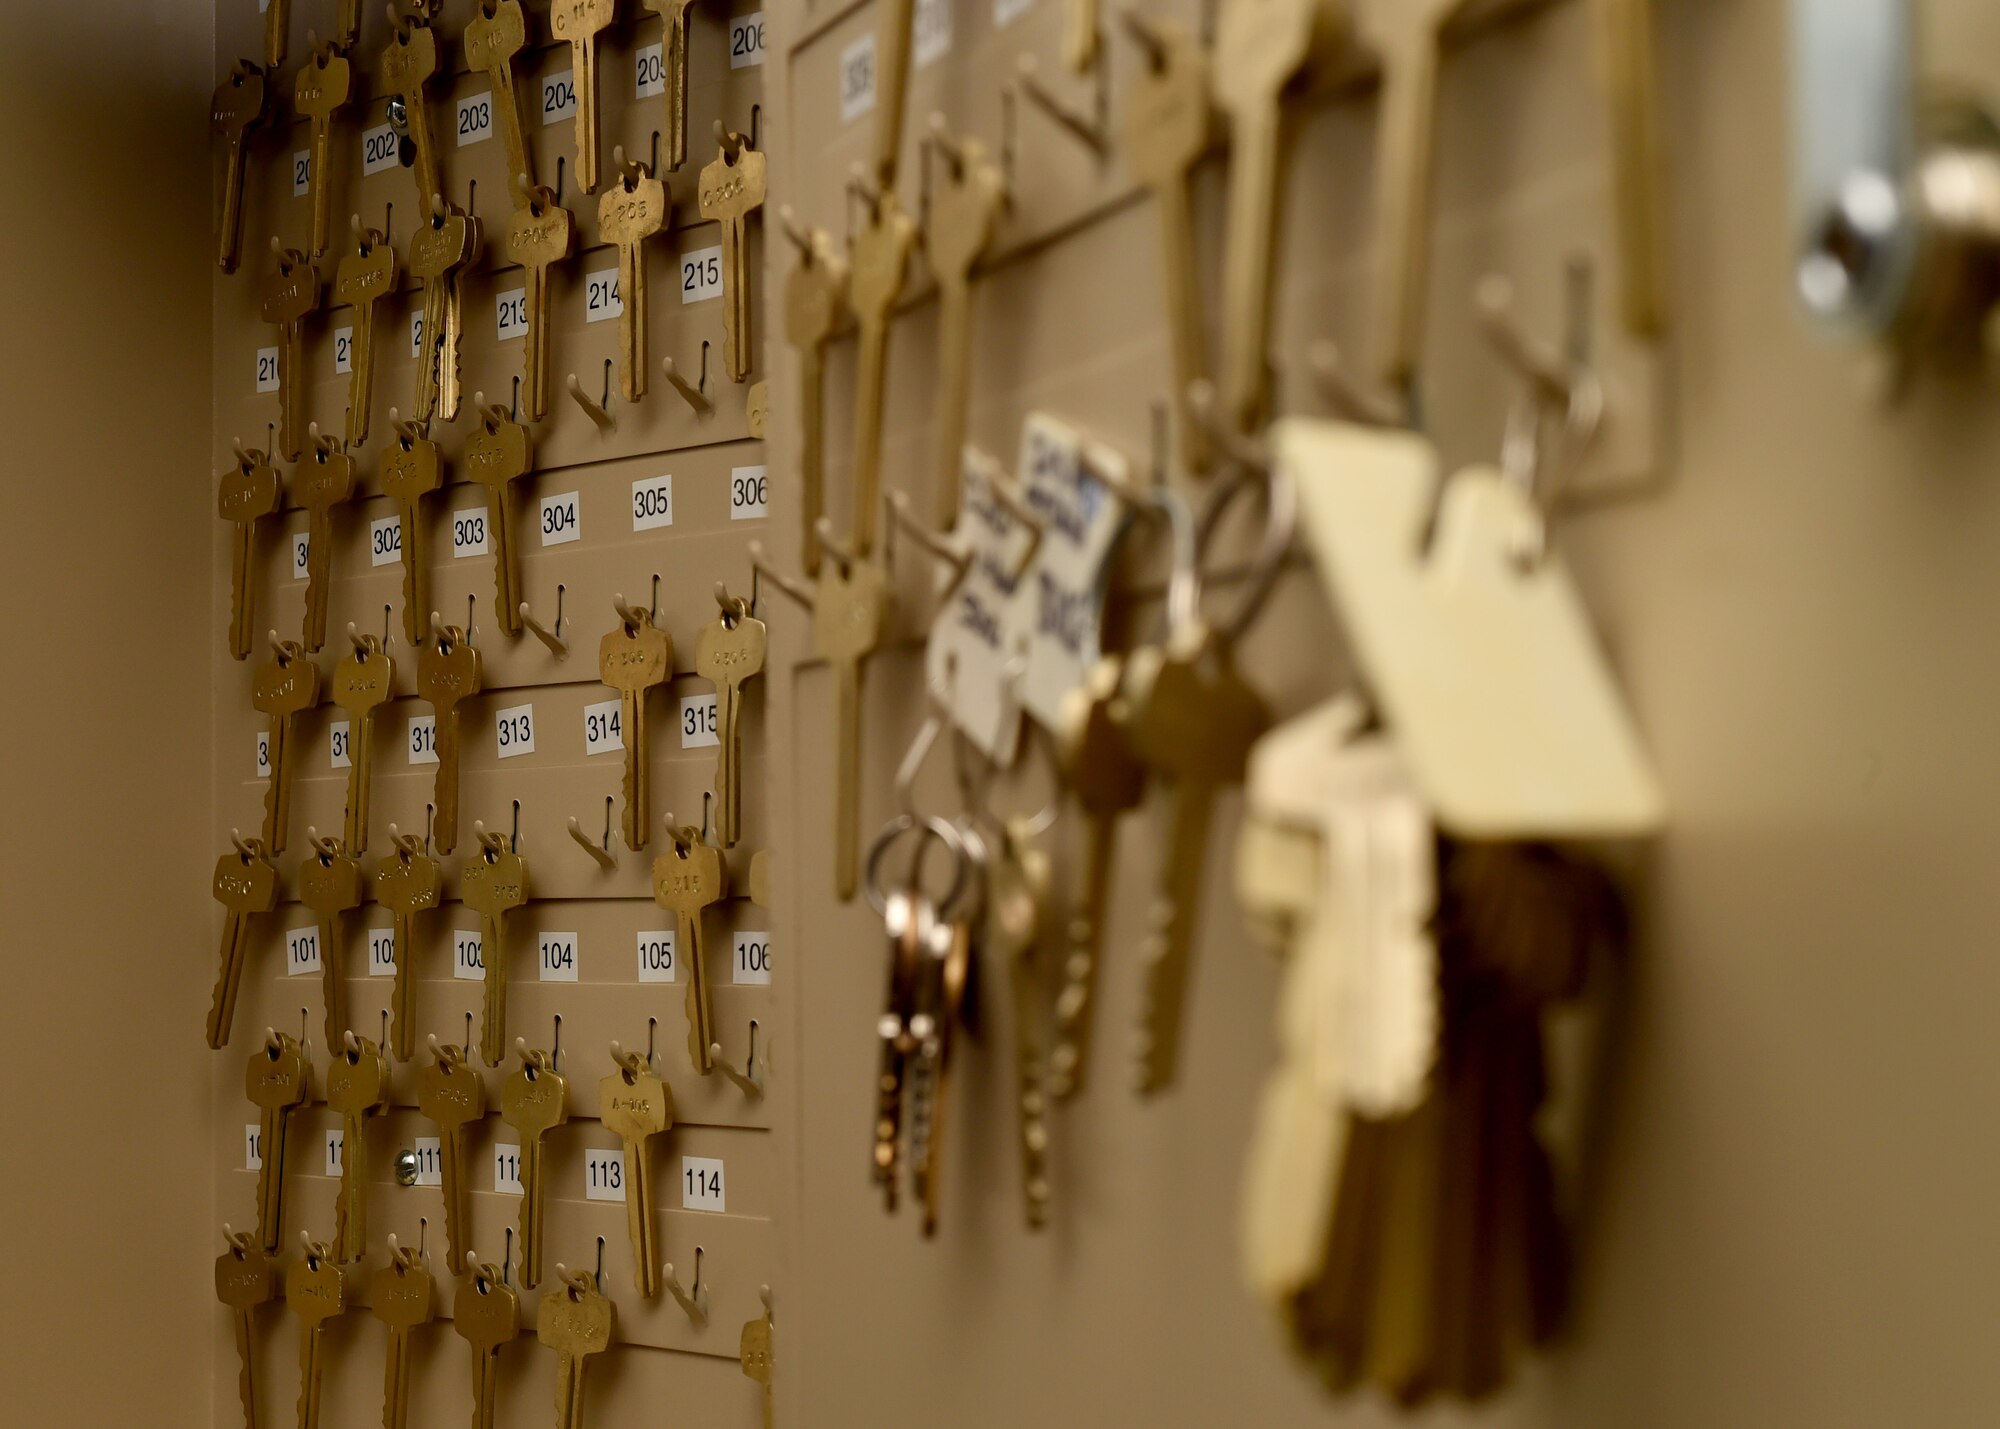 Spare keys for the Altus Air Force Base dormitory hangs in the dorm managers office, June 30, 2017, at Altus AFB, Oklahoma. Dorm management works to improve dorm quality of life for the first-term Airmen living on base by preforming multiple tasks to maintain the longevity of the Altus AFB dorms. (U.S. Air Force Photo by Airman 1st Class Jackson N. Haddon/Released).